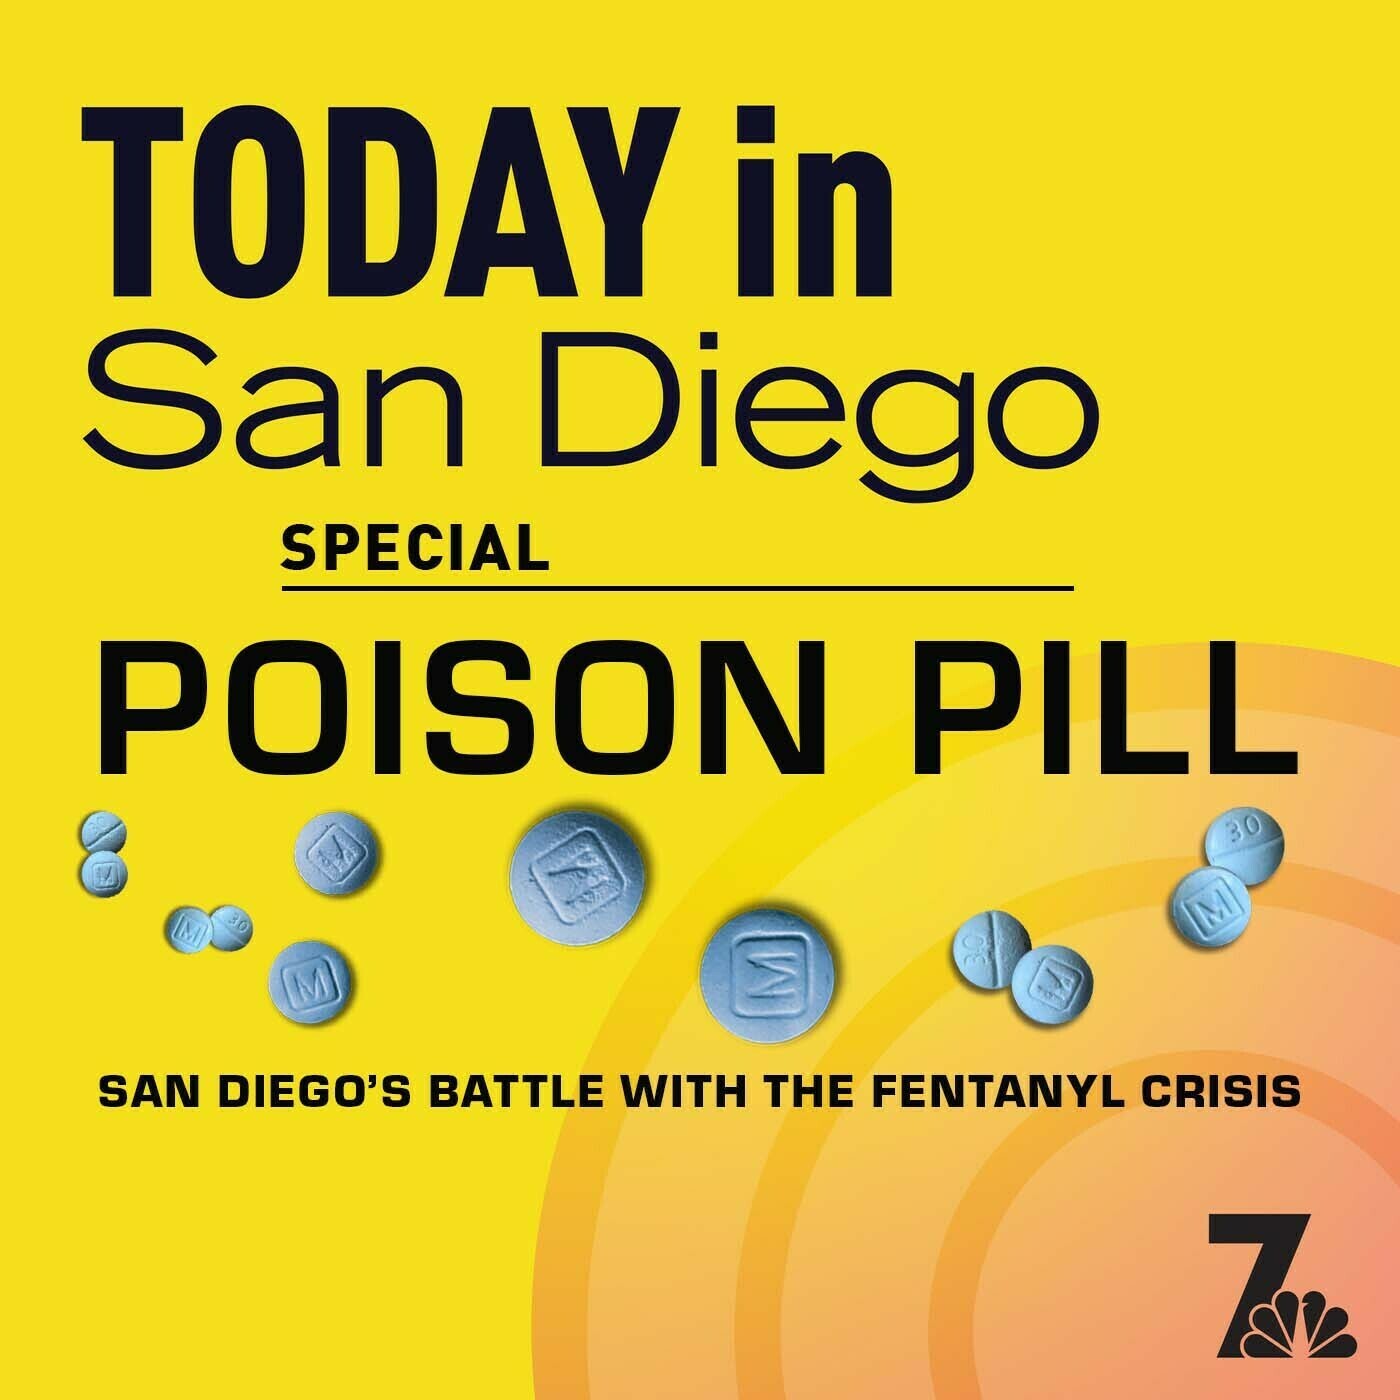 Today in San Diego Special: Poison Pill